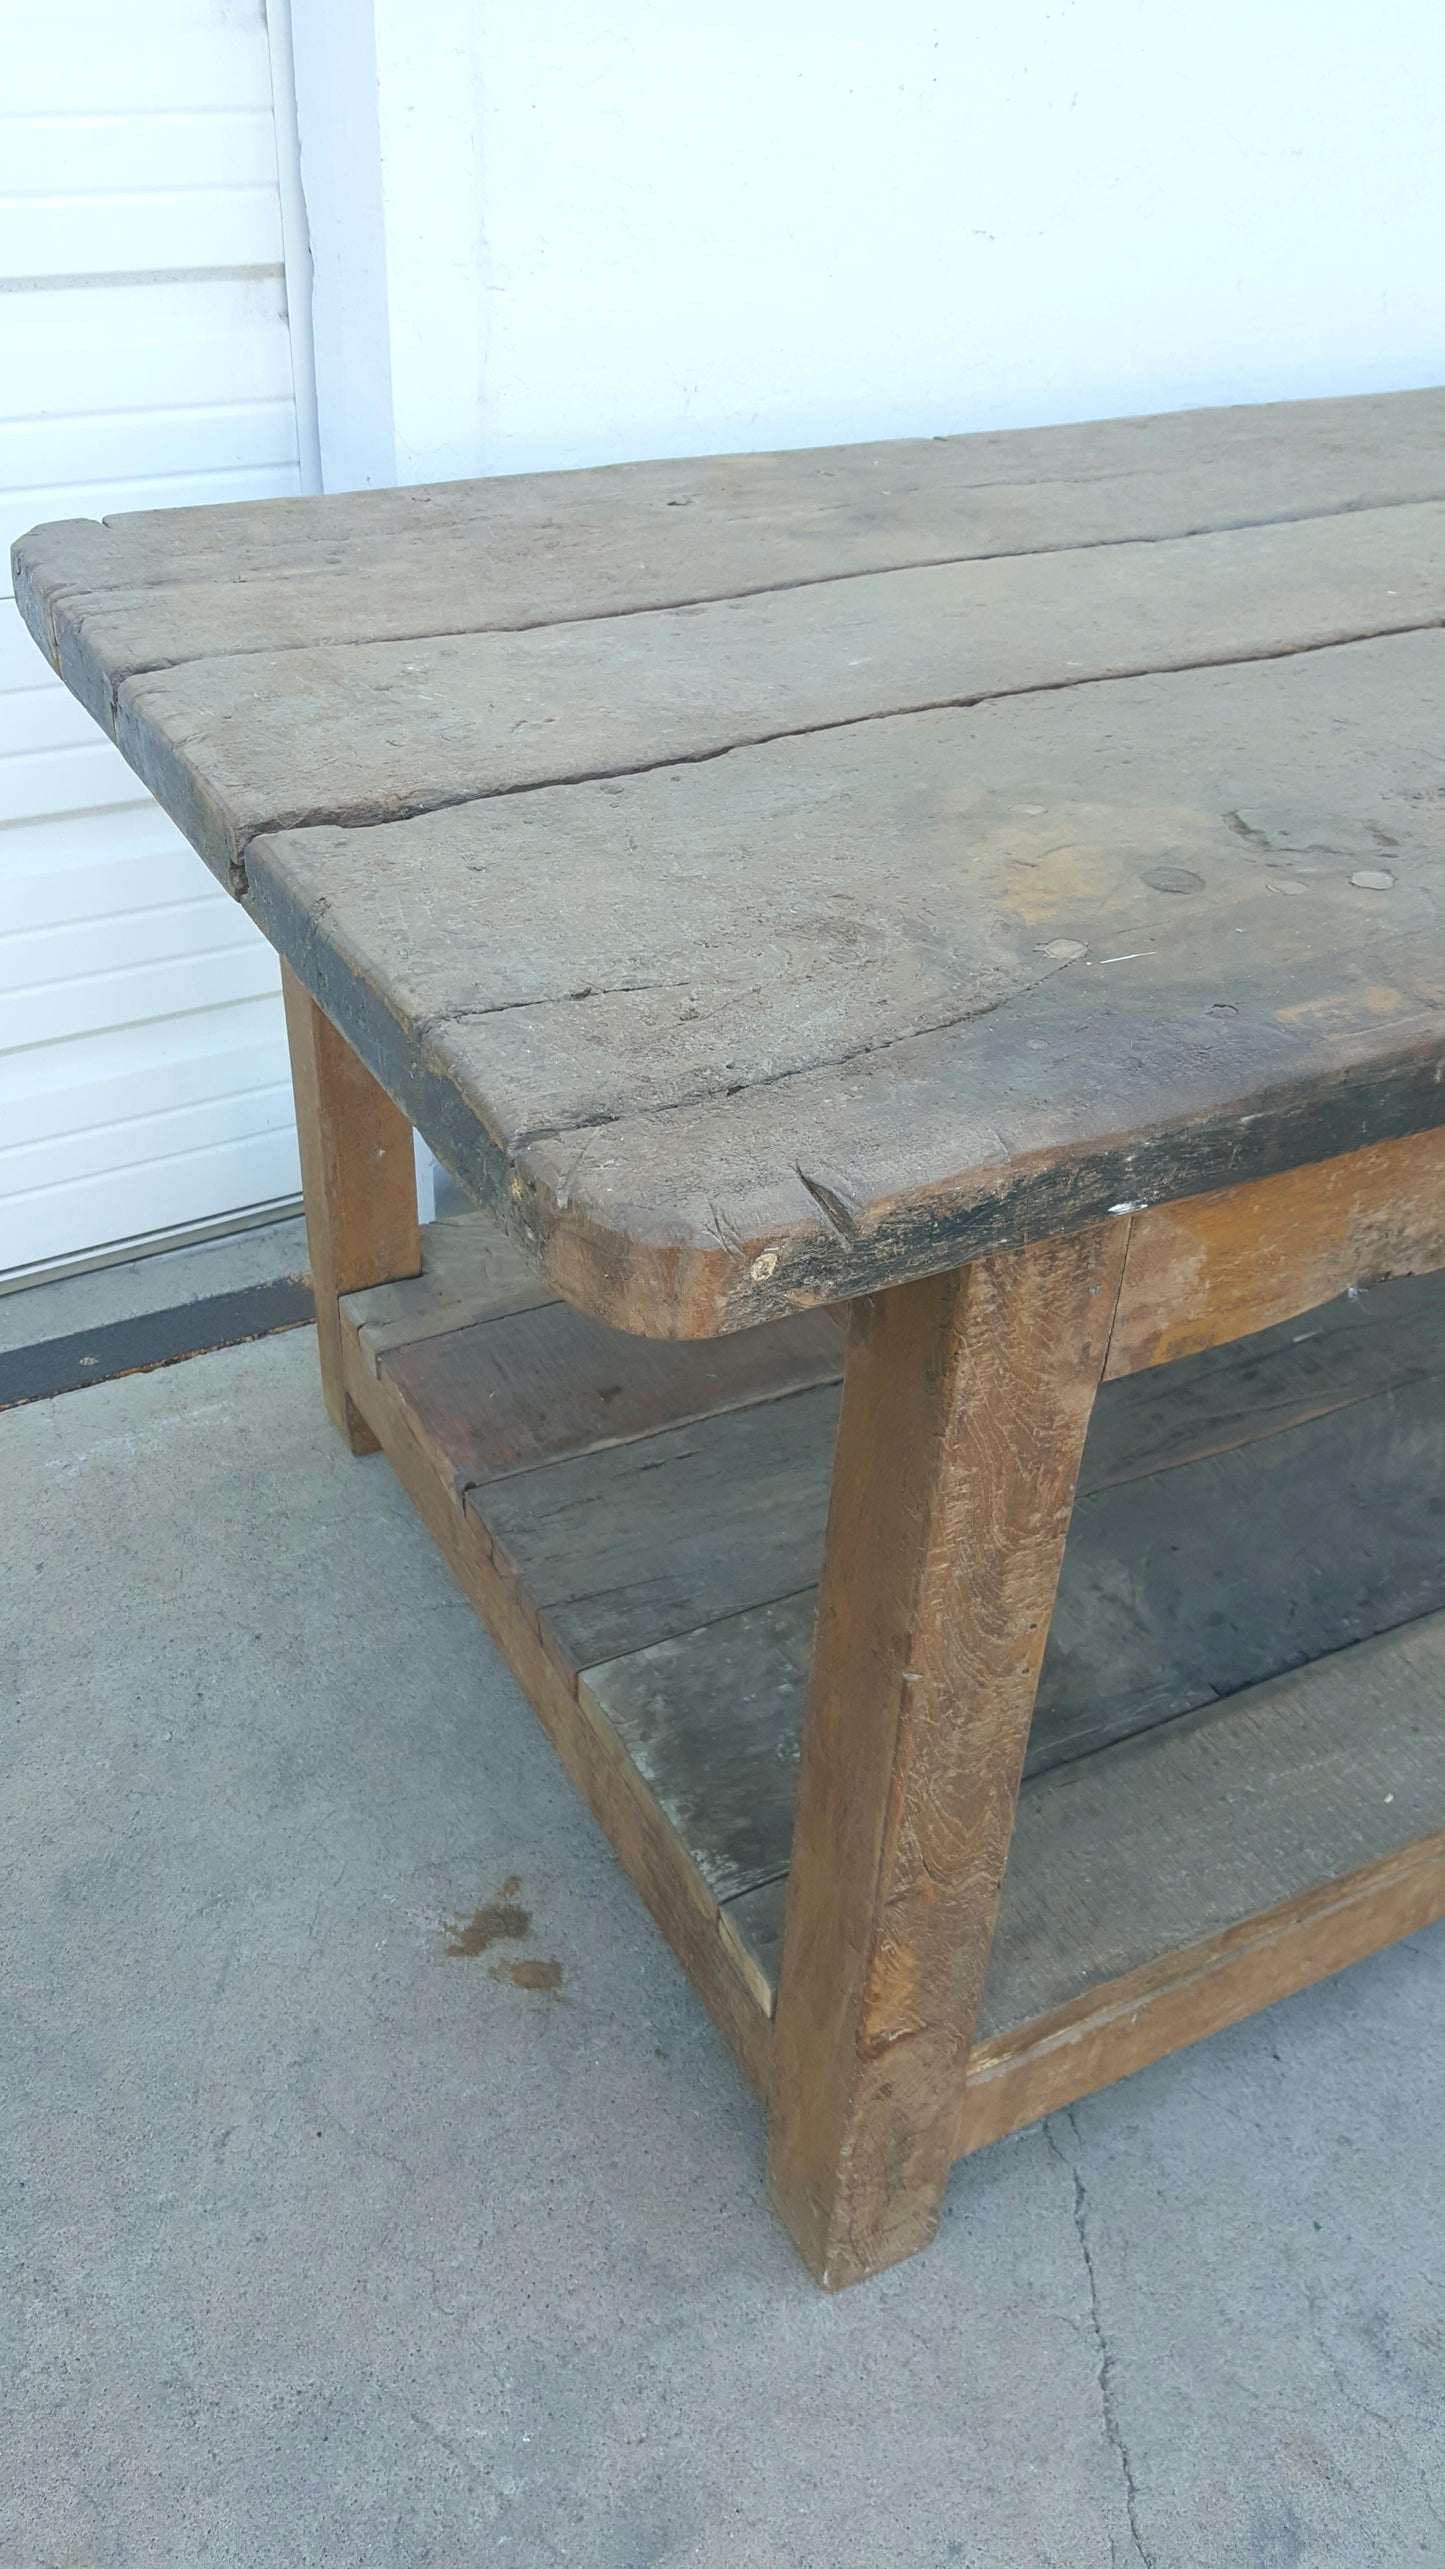 Antique Wood Island Work Table